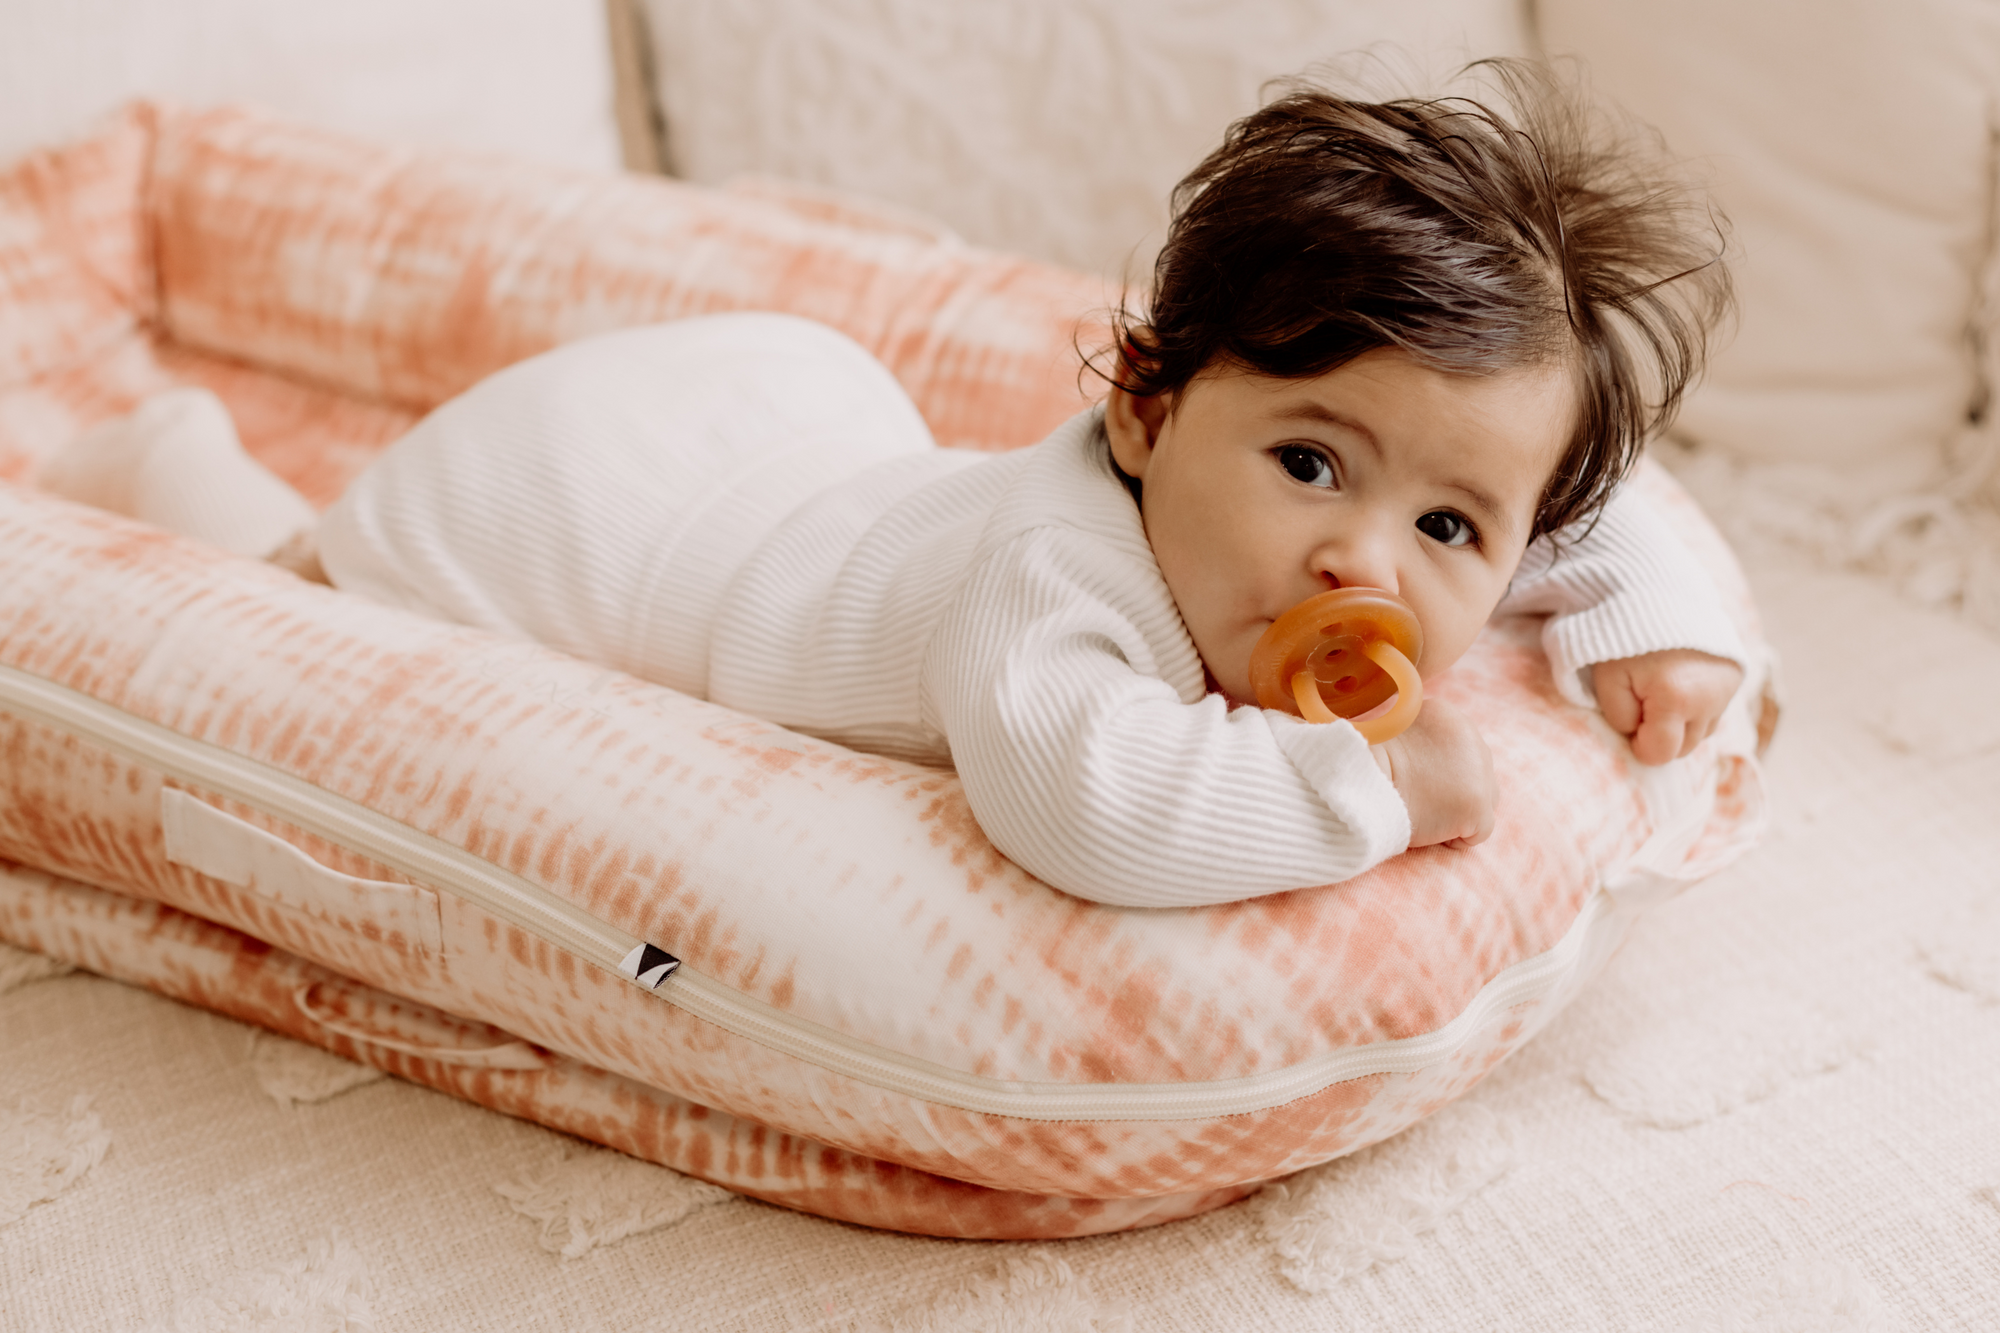 The Complete Guide to Tear-Free Tummy Time for Baby